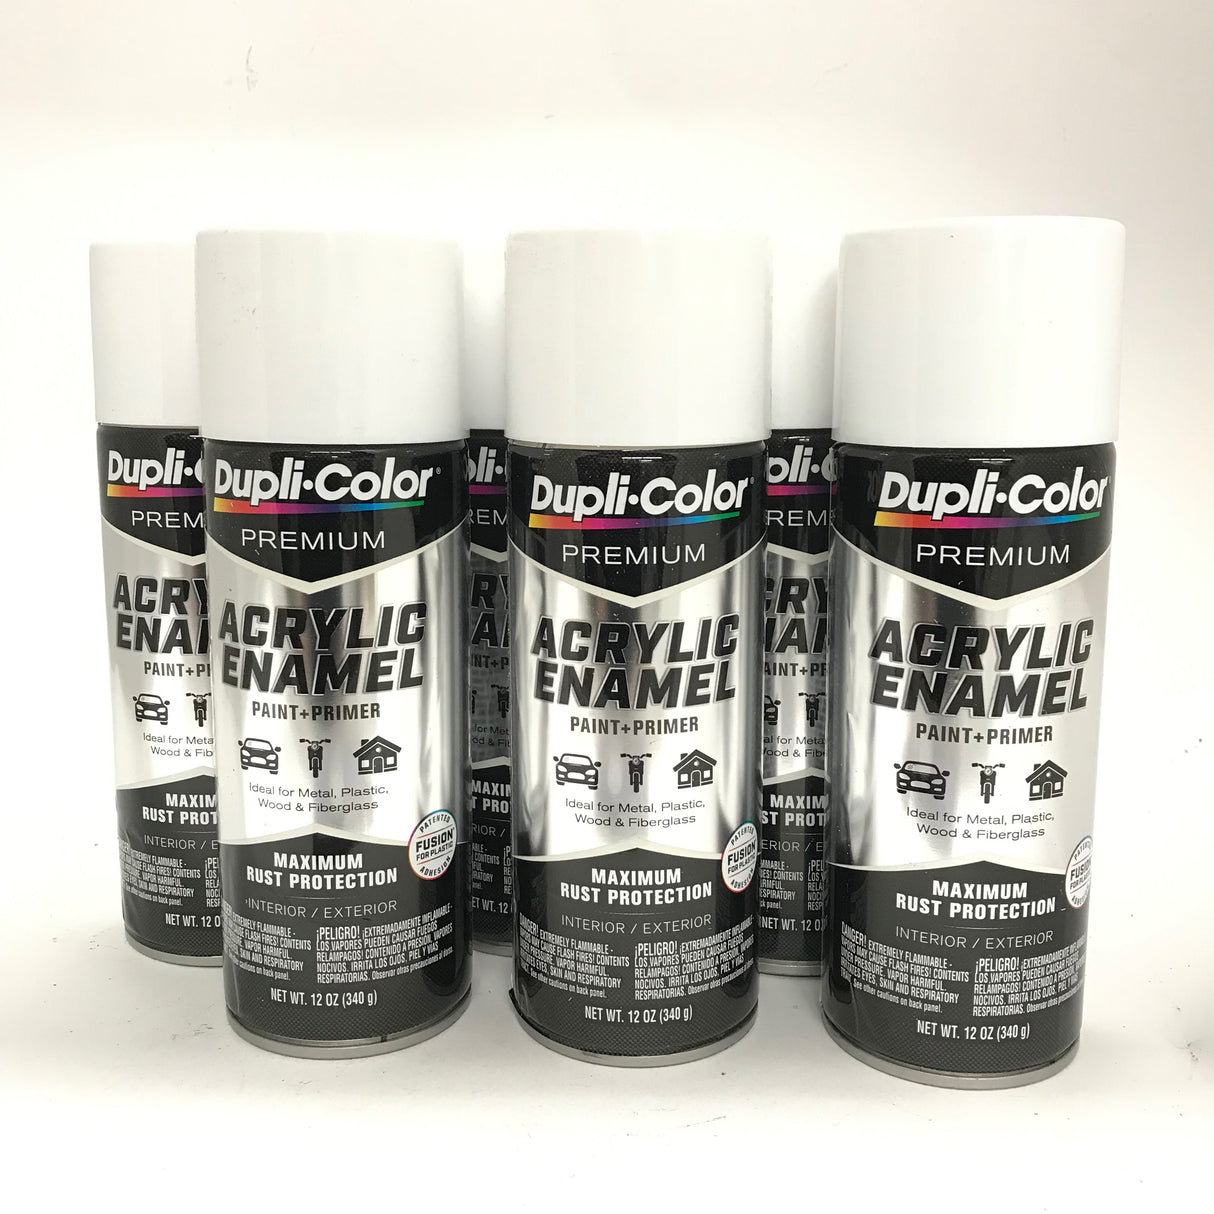 Duplicolor PAE110-6 PACK GLOSS WHITE Premium Acrylic Enamel -Max Rust Protection - 12 OZ